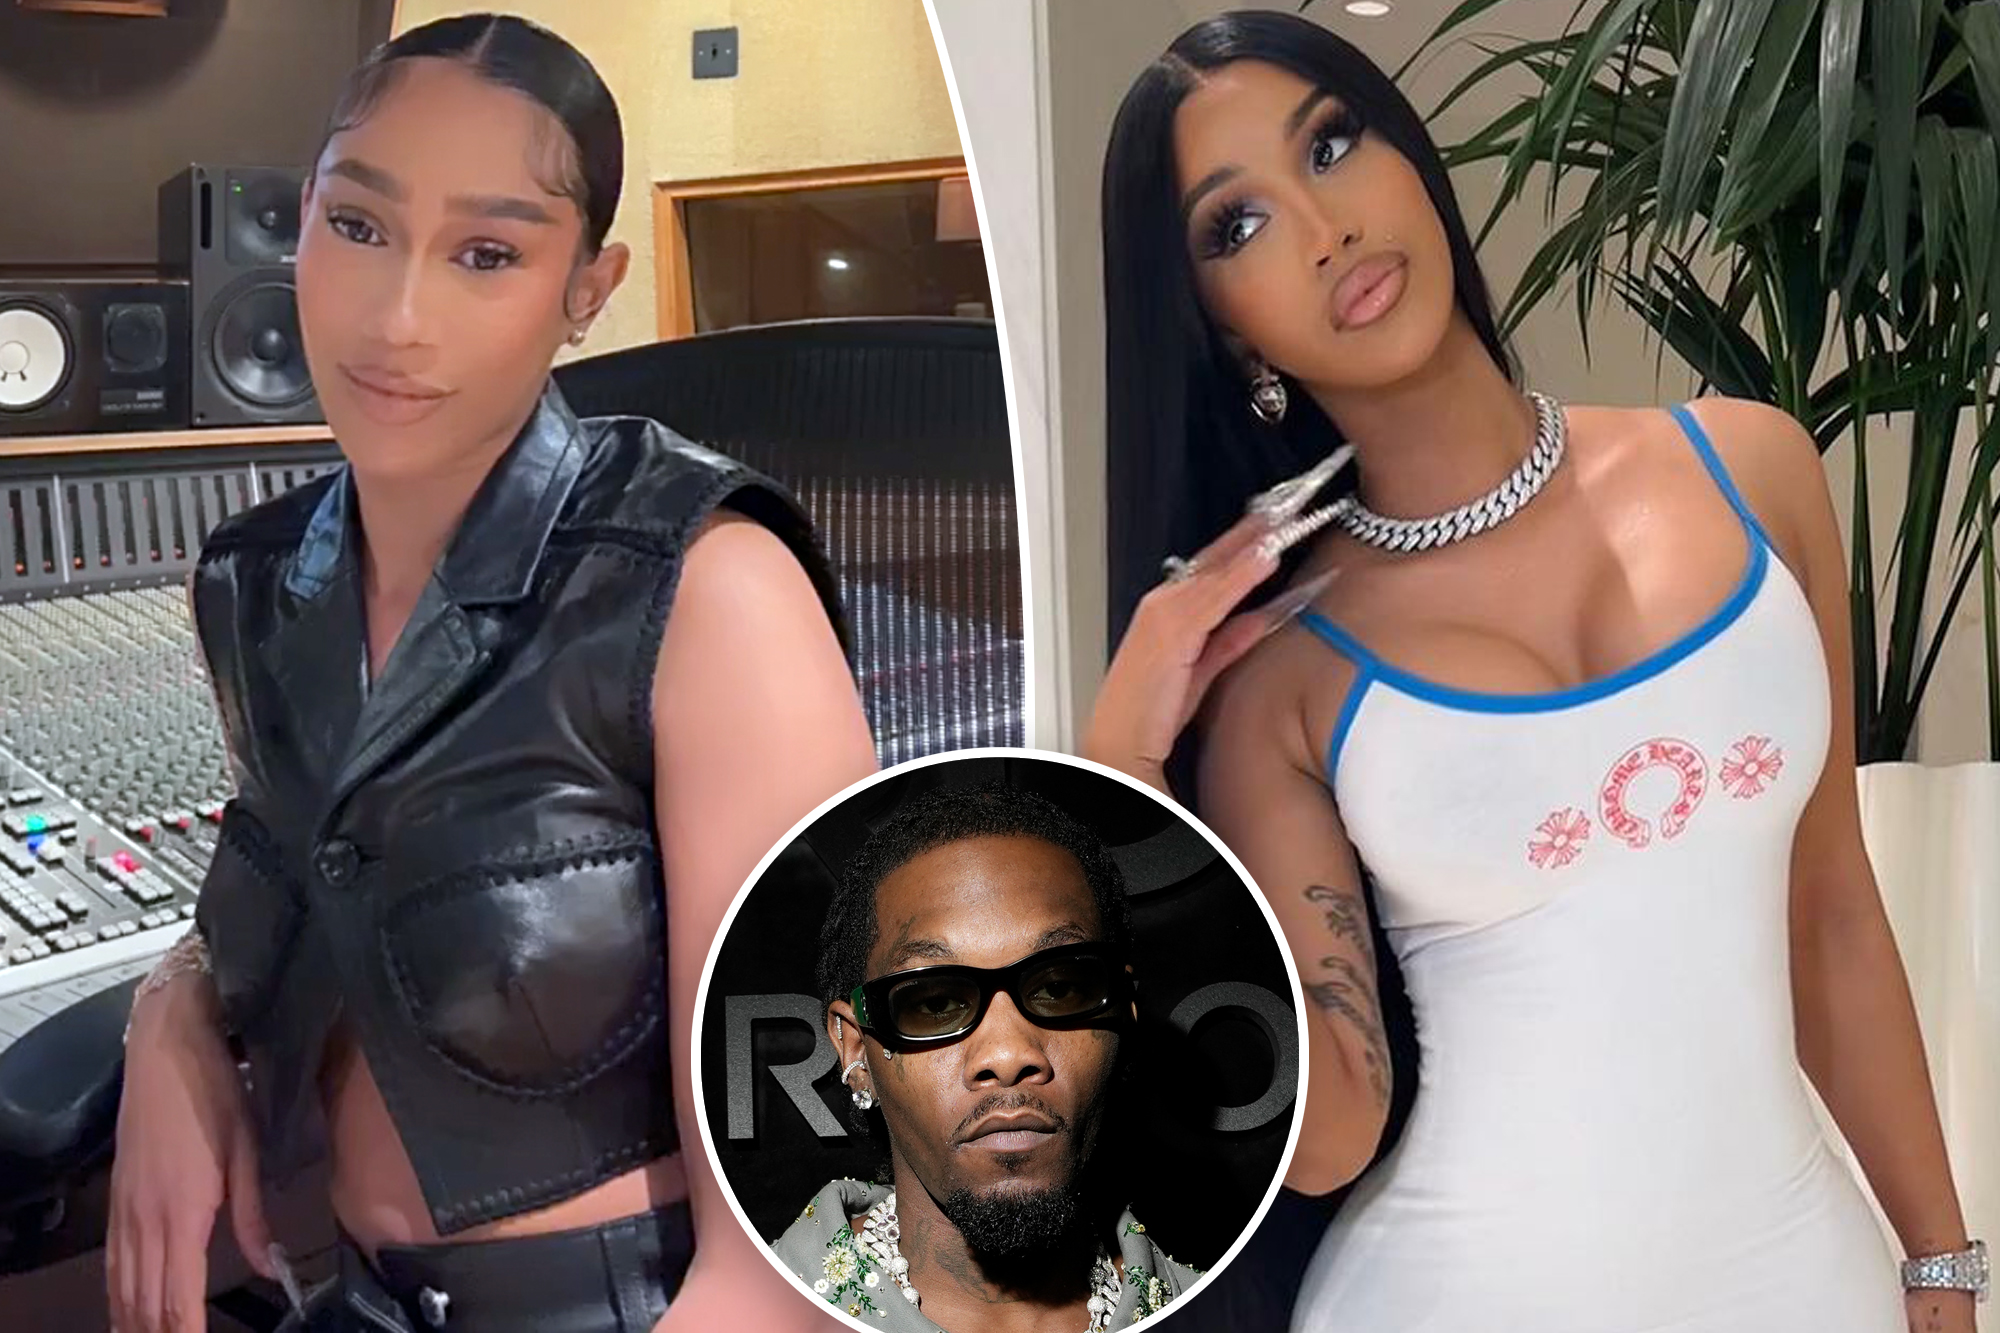 Rapper Bia's Bold Diss Track Takes Aim at Cardi B and Offset